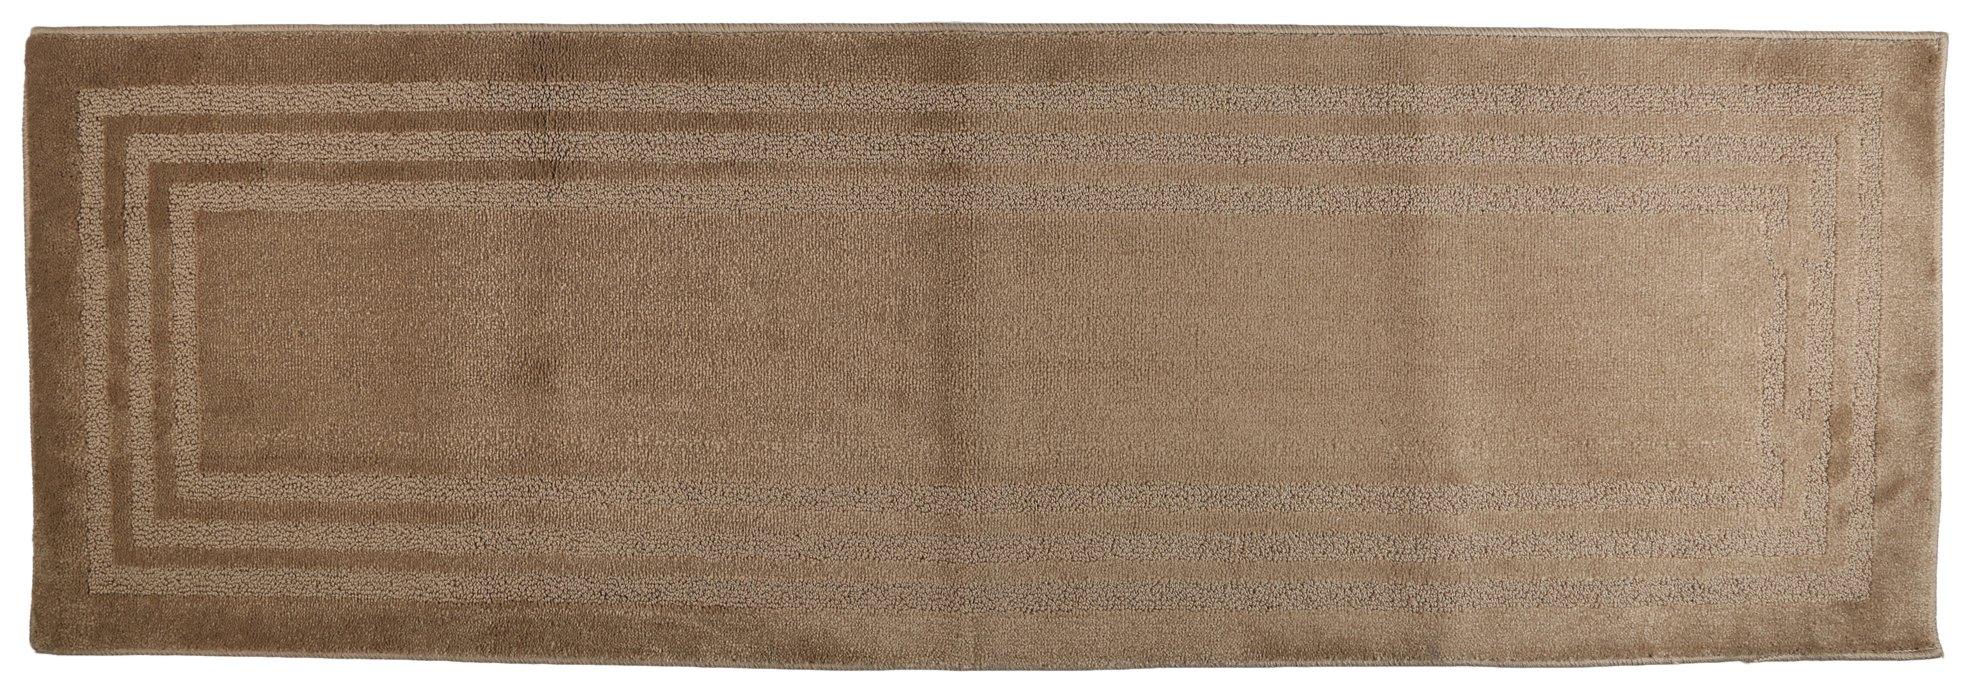 Mohawk 20x60 Textured Tufted Accent Rug